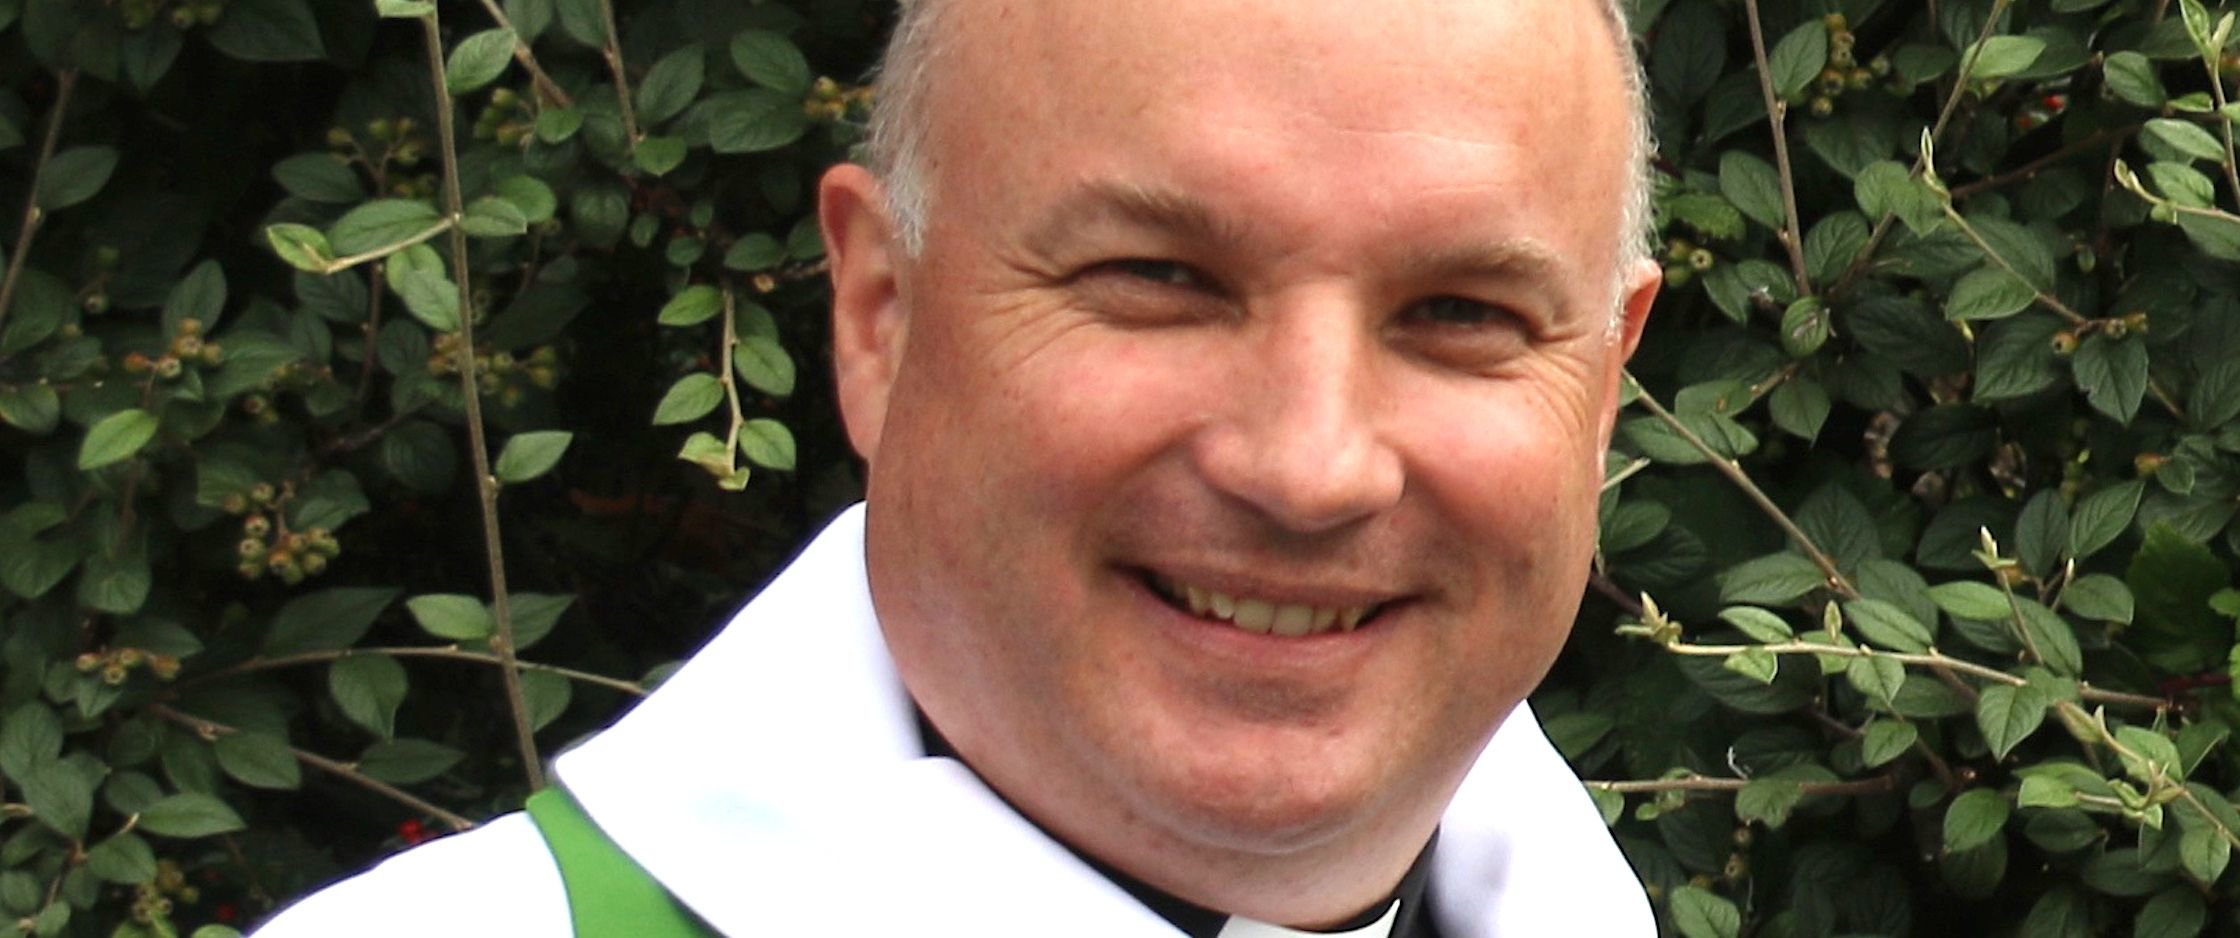 New Bishop of Cashel, Ferns & Ossory elected